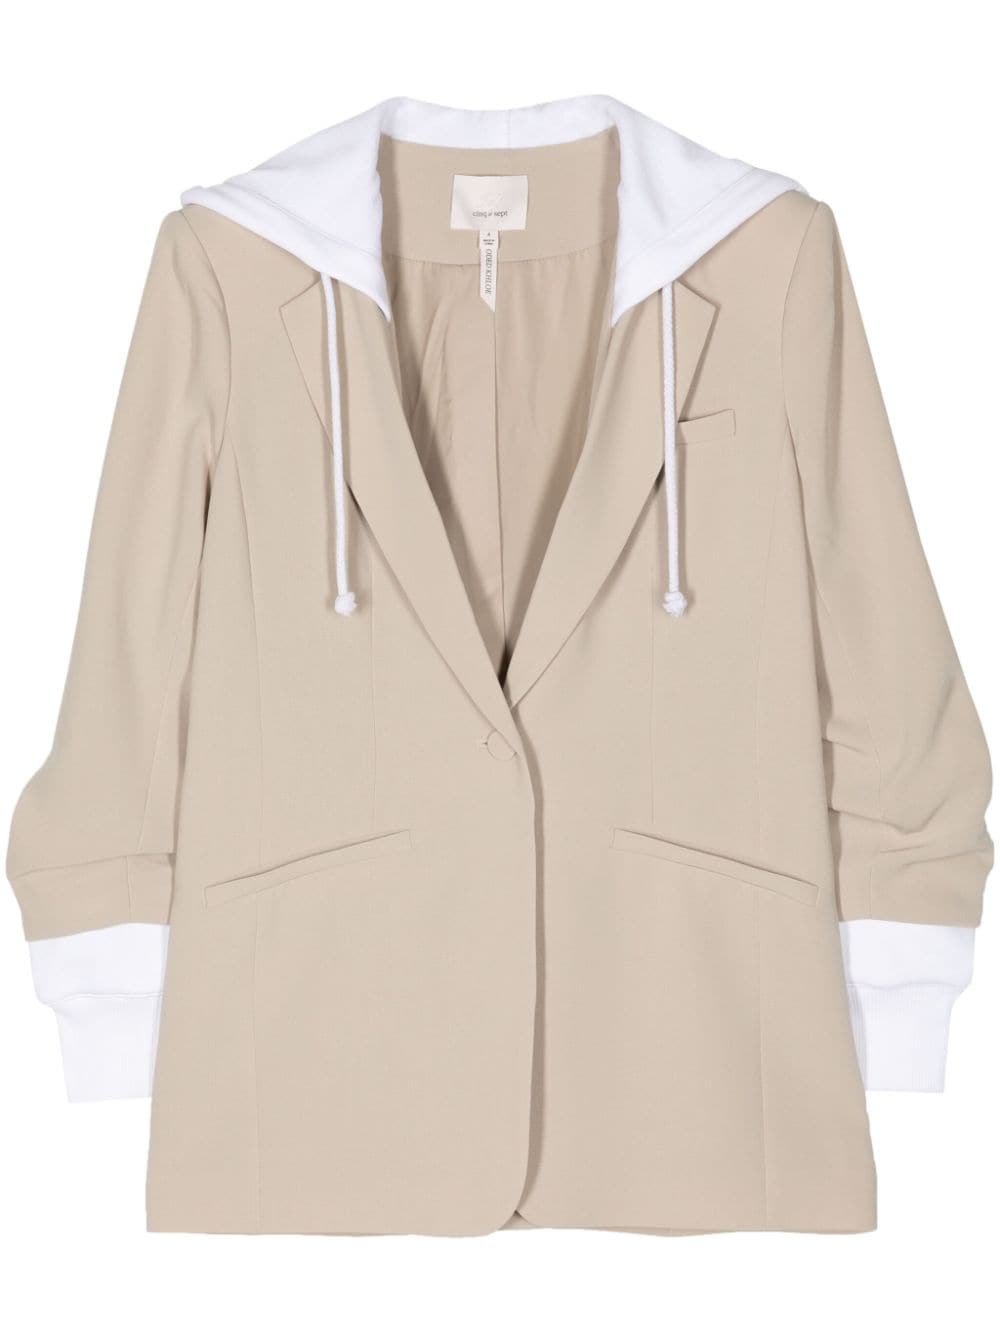 Cinq À Sept Khloe Faux Leather Hooded Jacket In Plaster/white